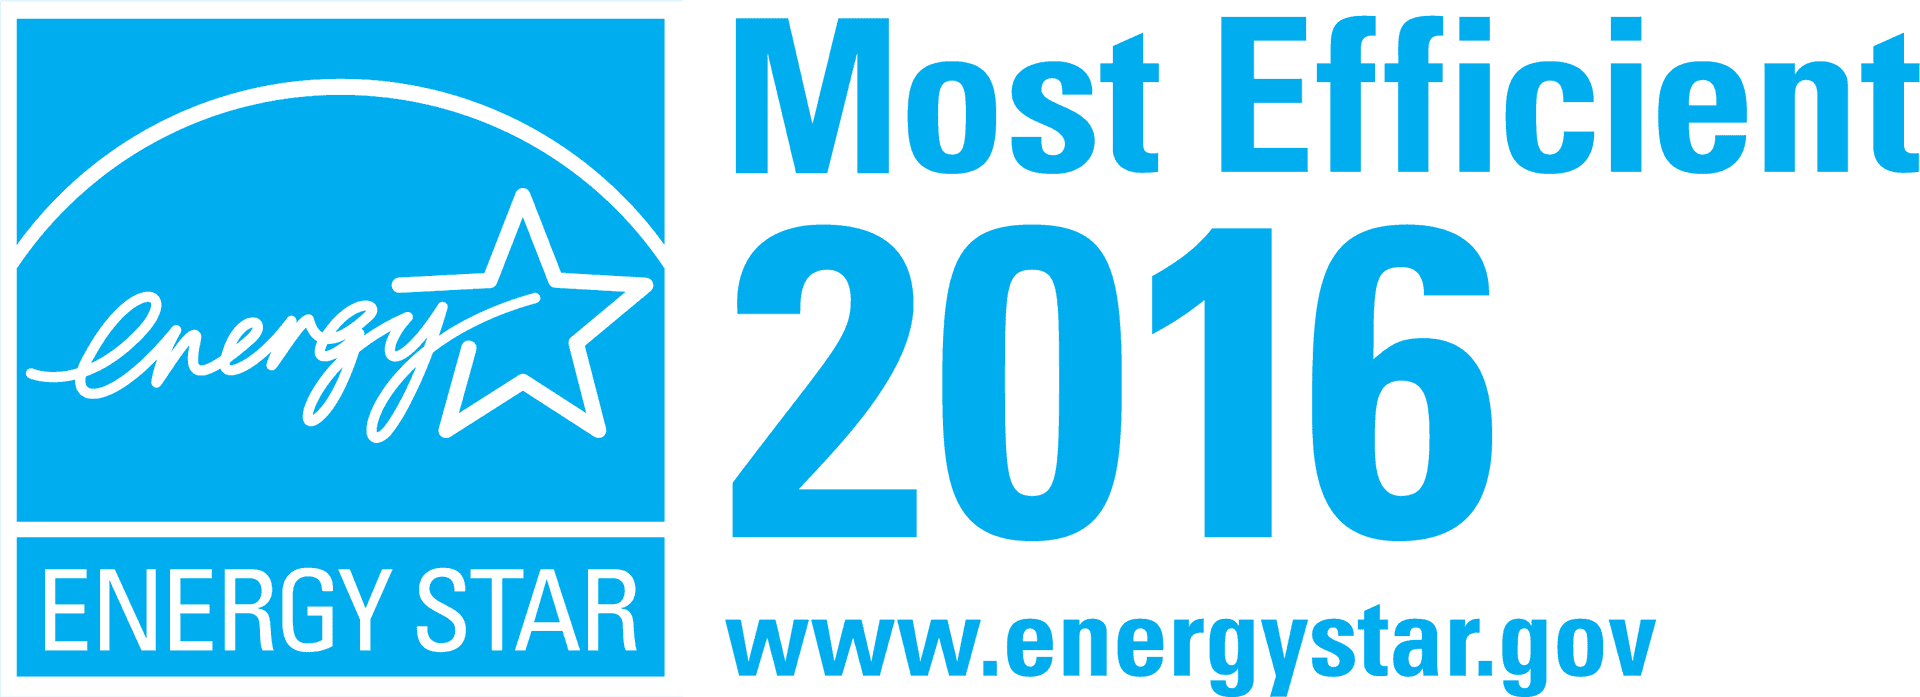 Energy Star Most Efficient2016 Logo PNG image